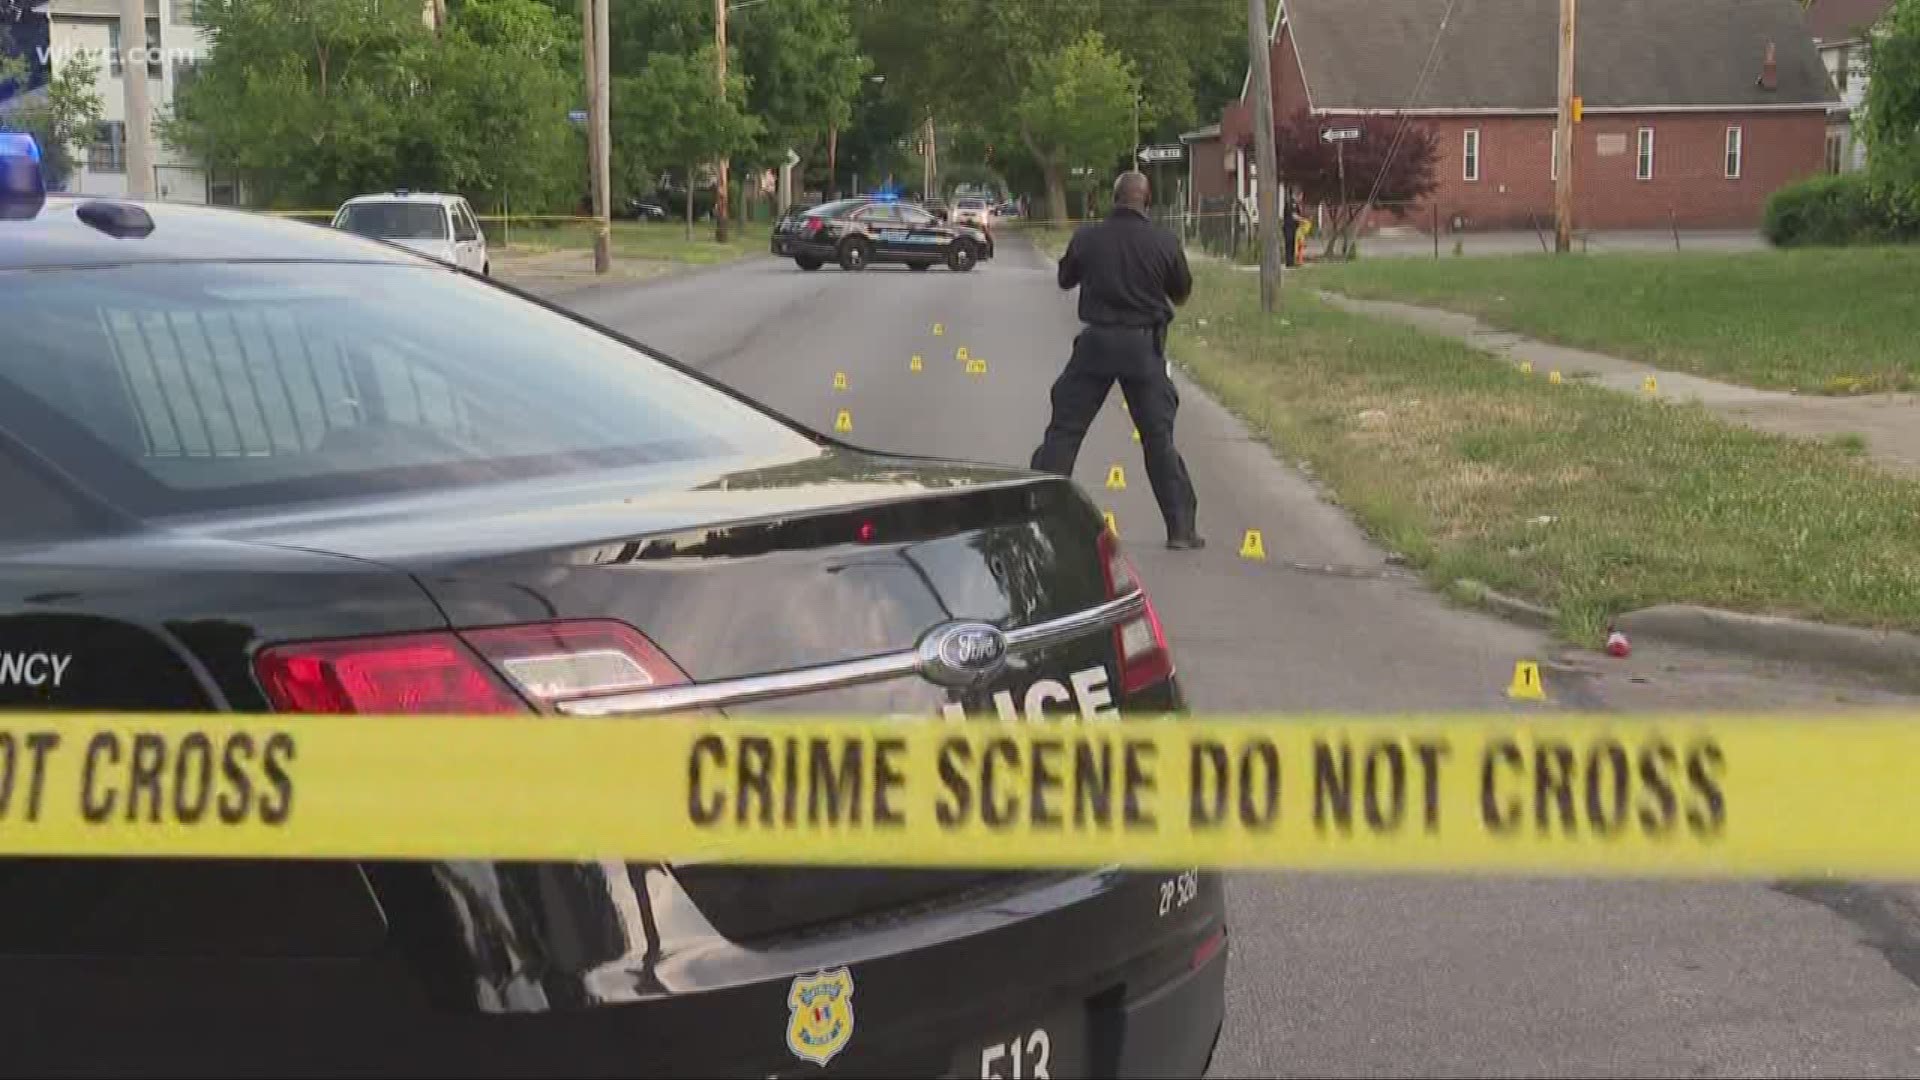 Cleveland homicides: What's being done?